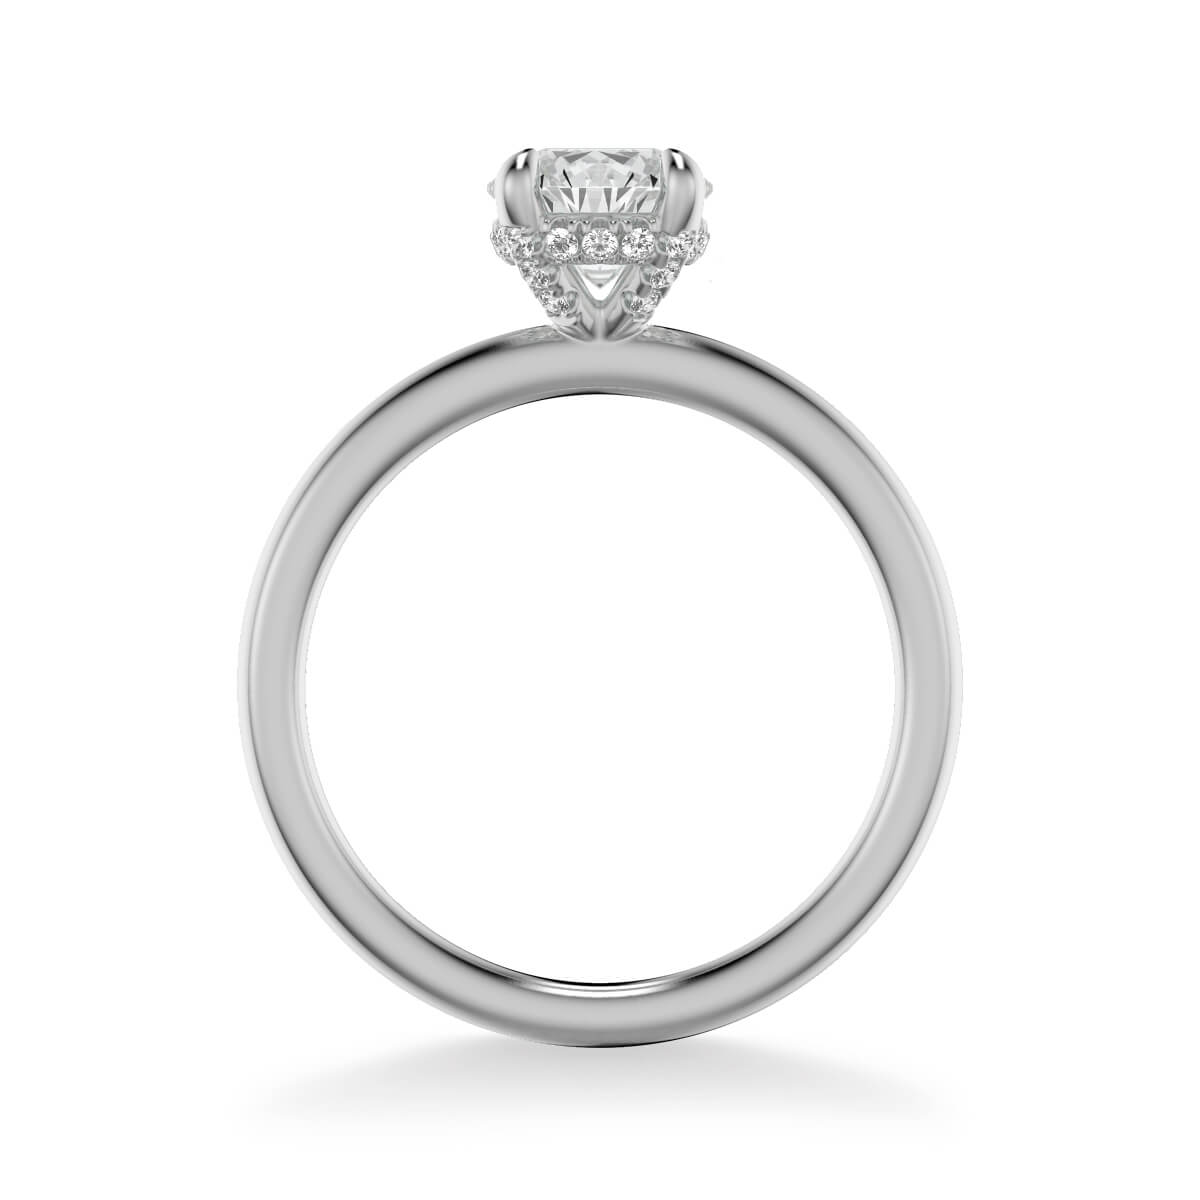 Elyse Classic Solitaire Diamond Engagement Ring